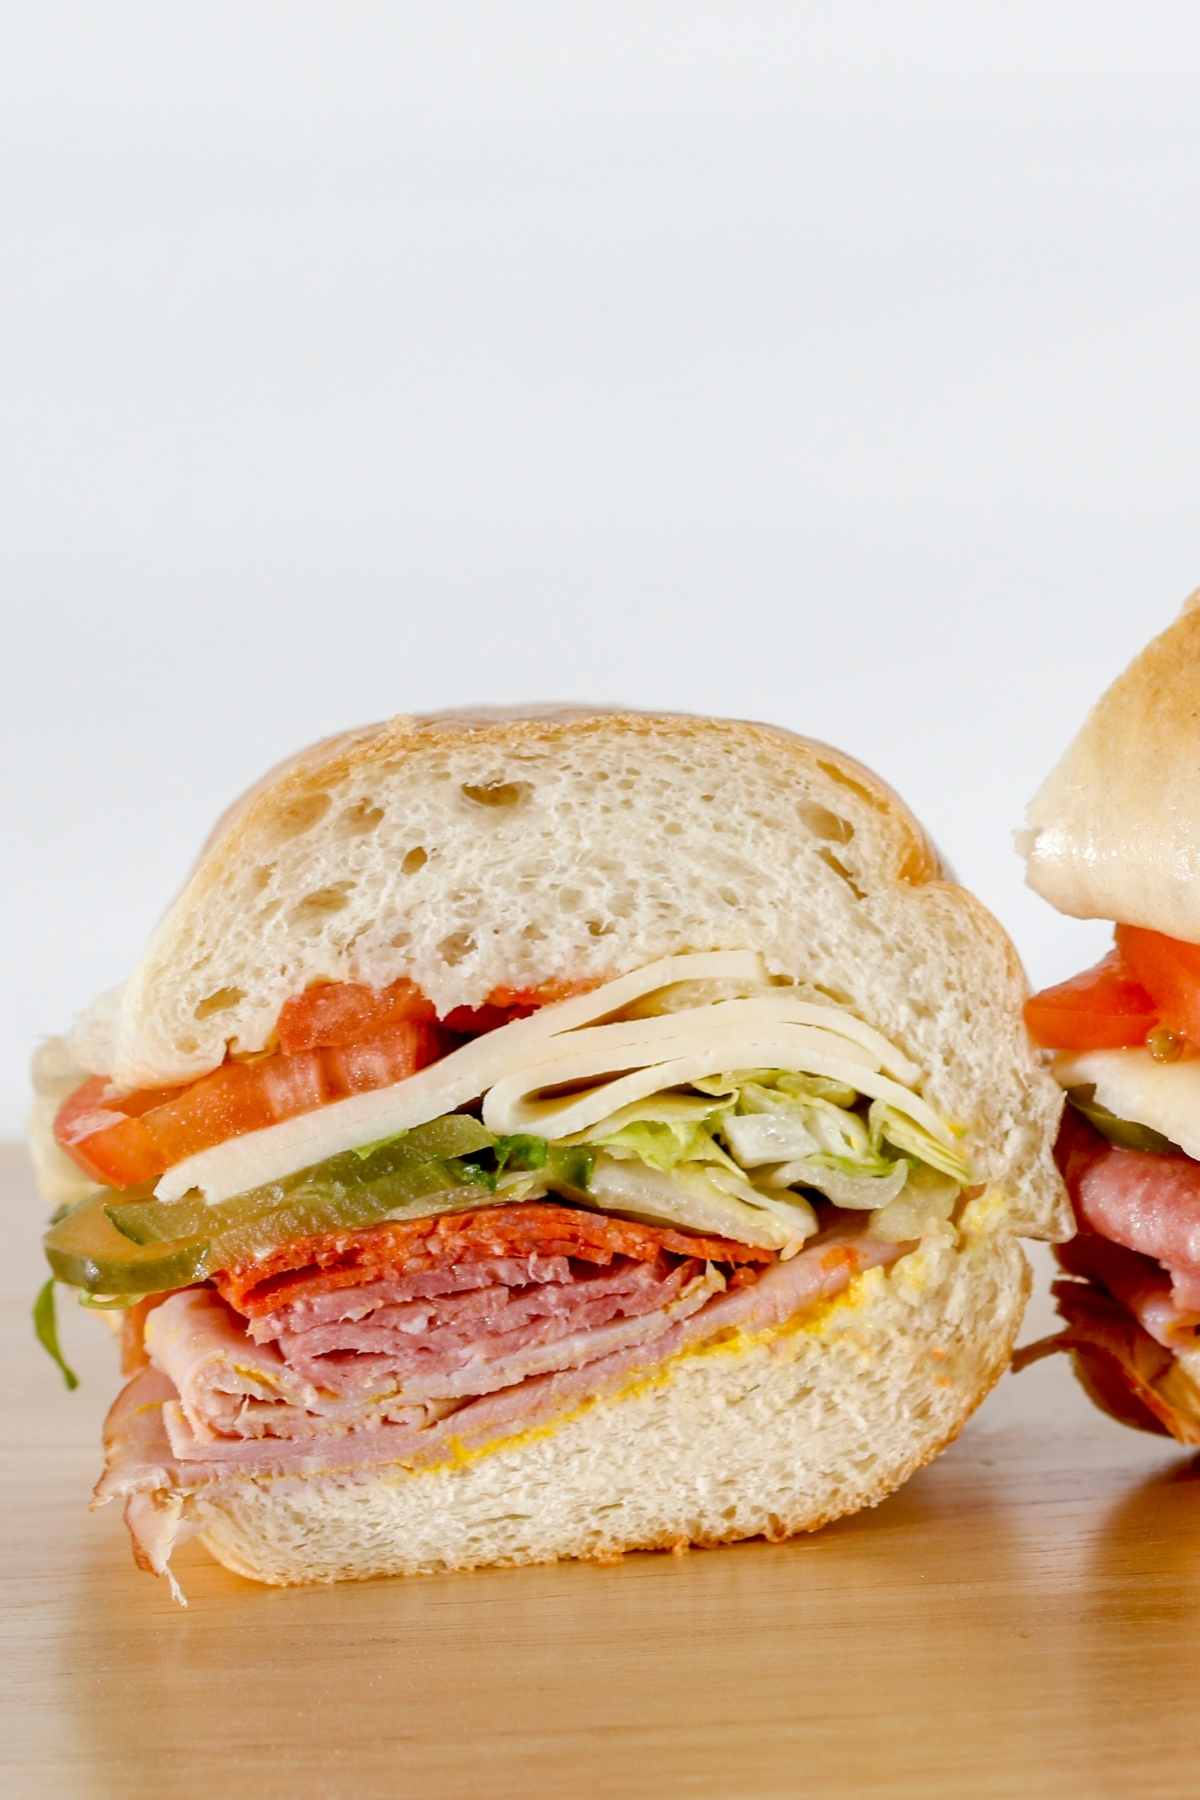 If you’re craving a meal that’s hearty and big on flavor, this Italian pepperoni sandwich is just what you need. It’s loaded with slices of pepperoni, salami, ham, and mozzarella cheese.